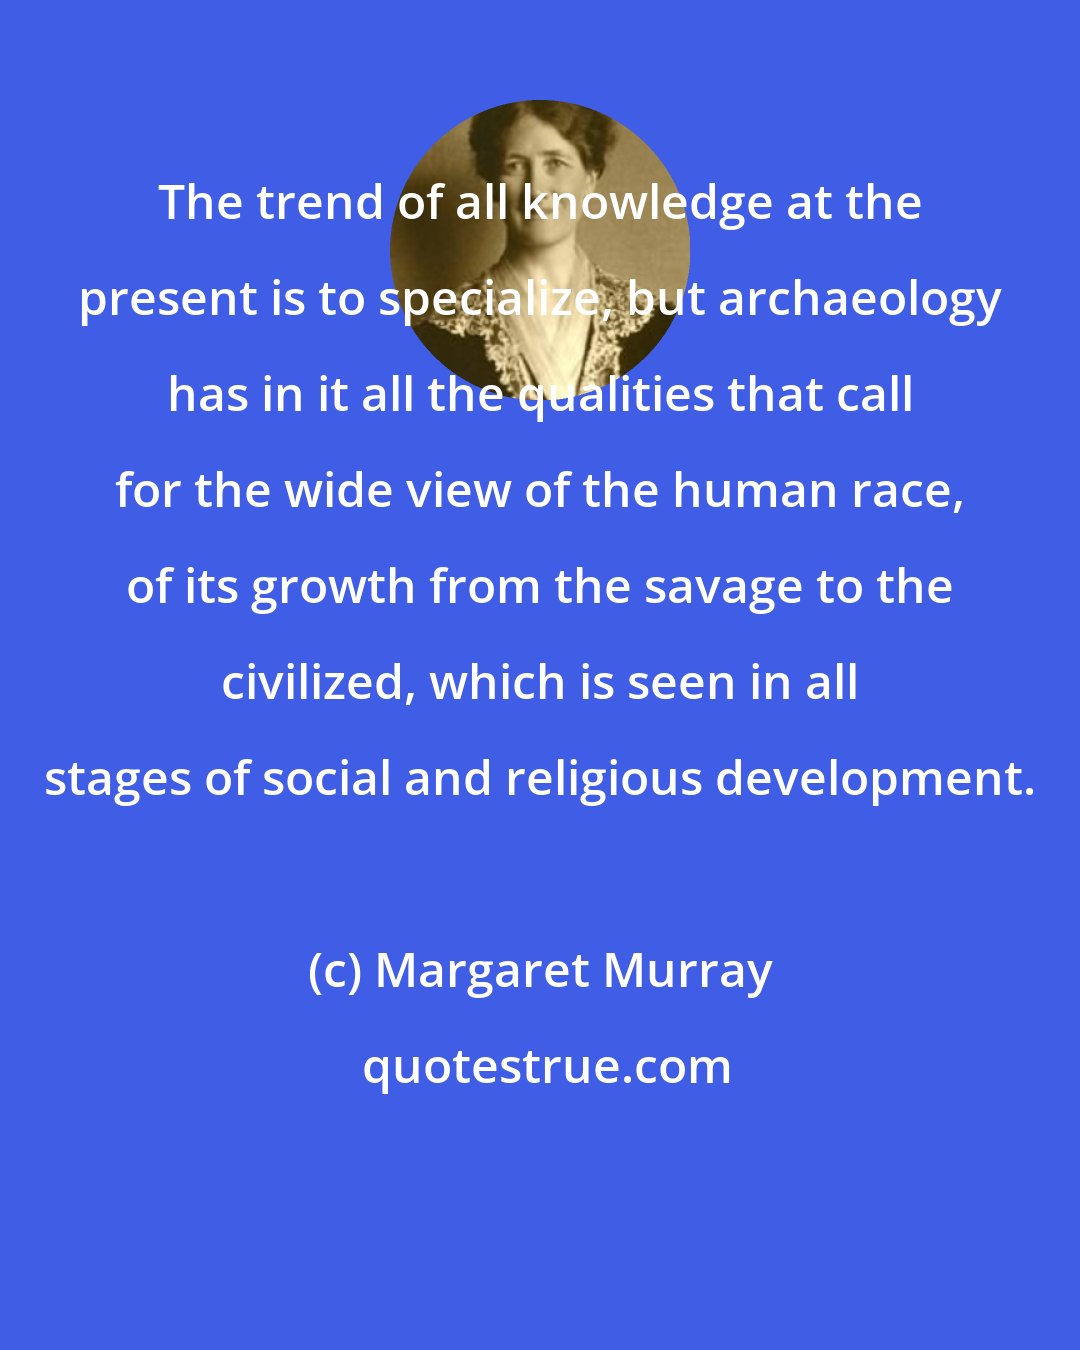 Margaret Murray: The trend of all knowledge at the present is to specialize, but archaeology has in it all the qualities that call for the wide view of the human race, of its growth from the savage to the civilized, which is seen in all stages of social and religious development.